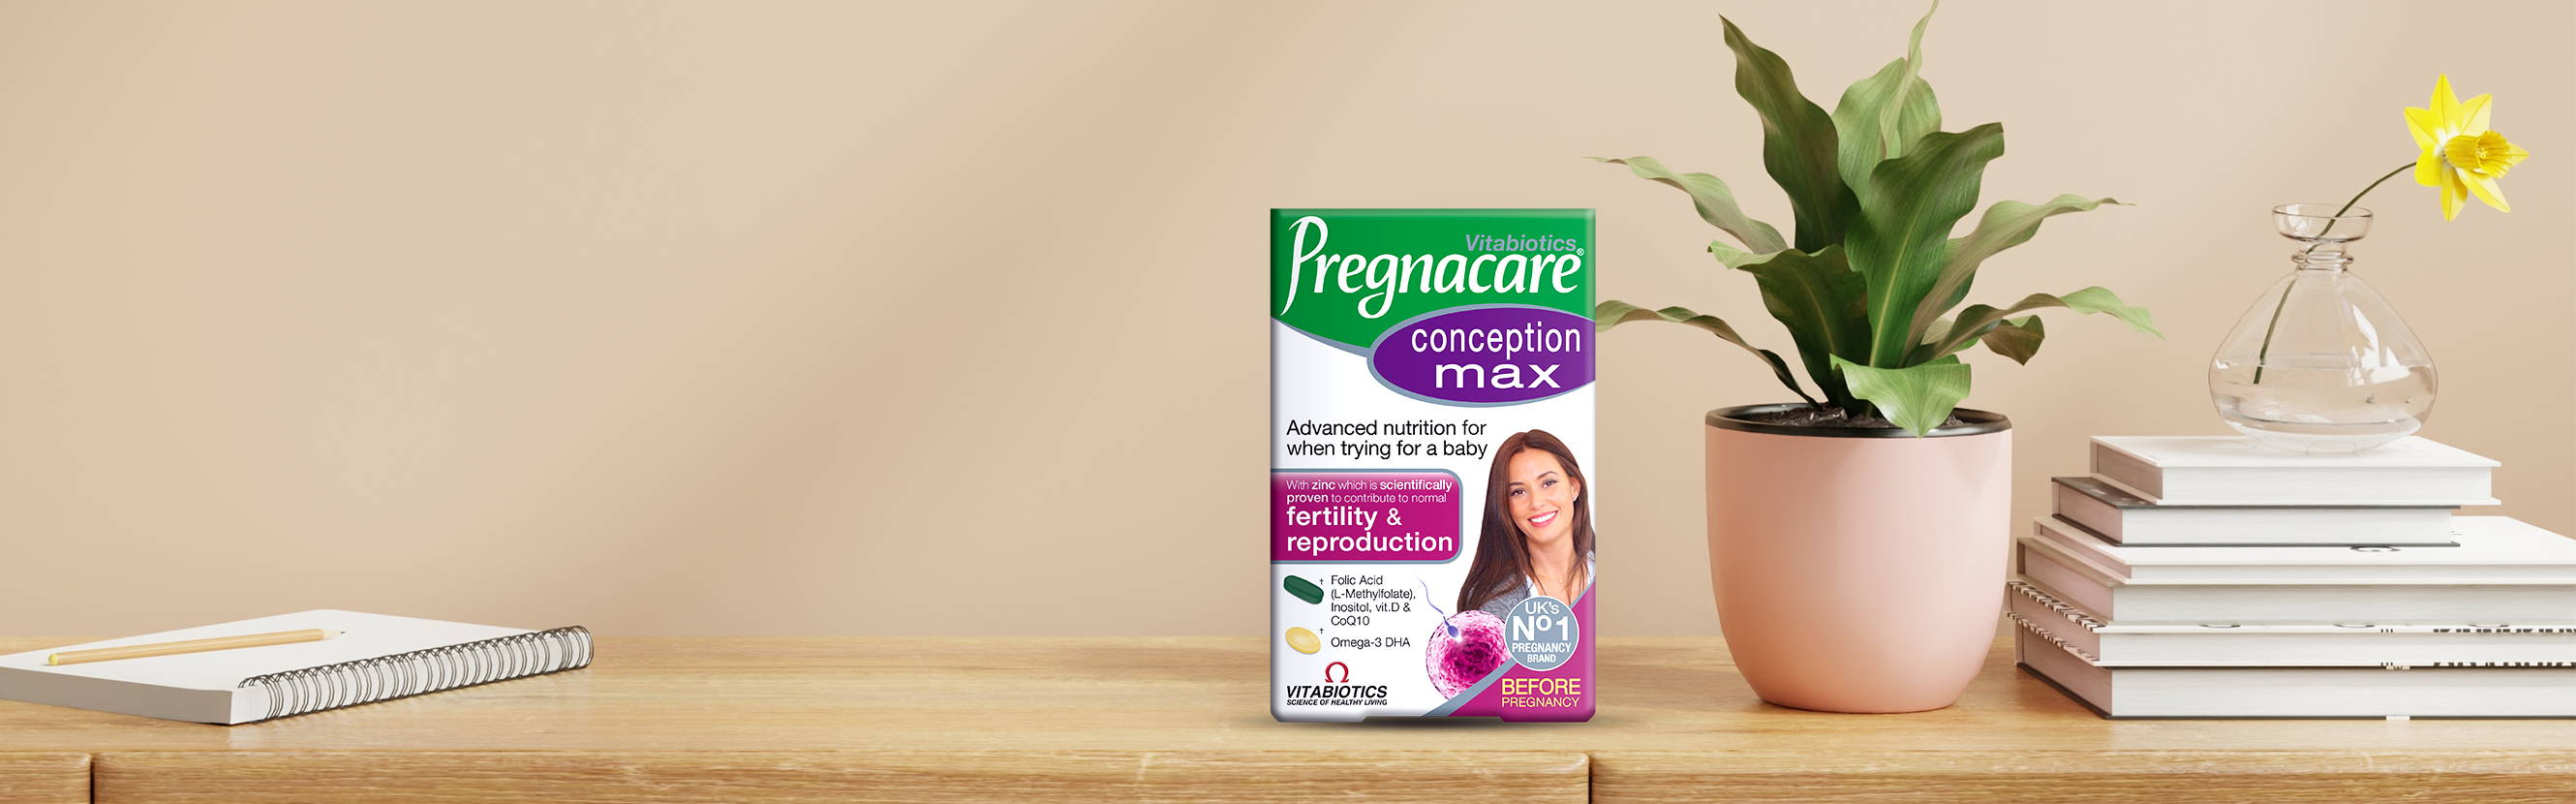  Pregnacare Conception Max is our ultimate ‘before pregnancy’ supplement which includes L-Methylfolate, an advanced form of folic acid, and a high purity Omega-3 capsule. No drugs, no hormones, just expert nutritional support when trying for a baby. 